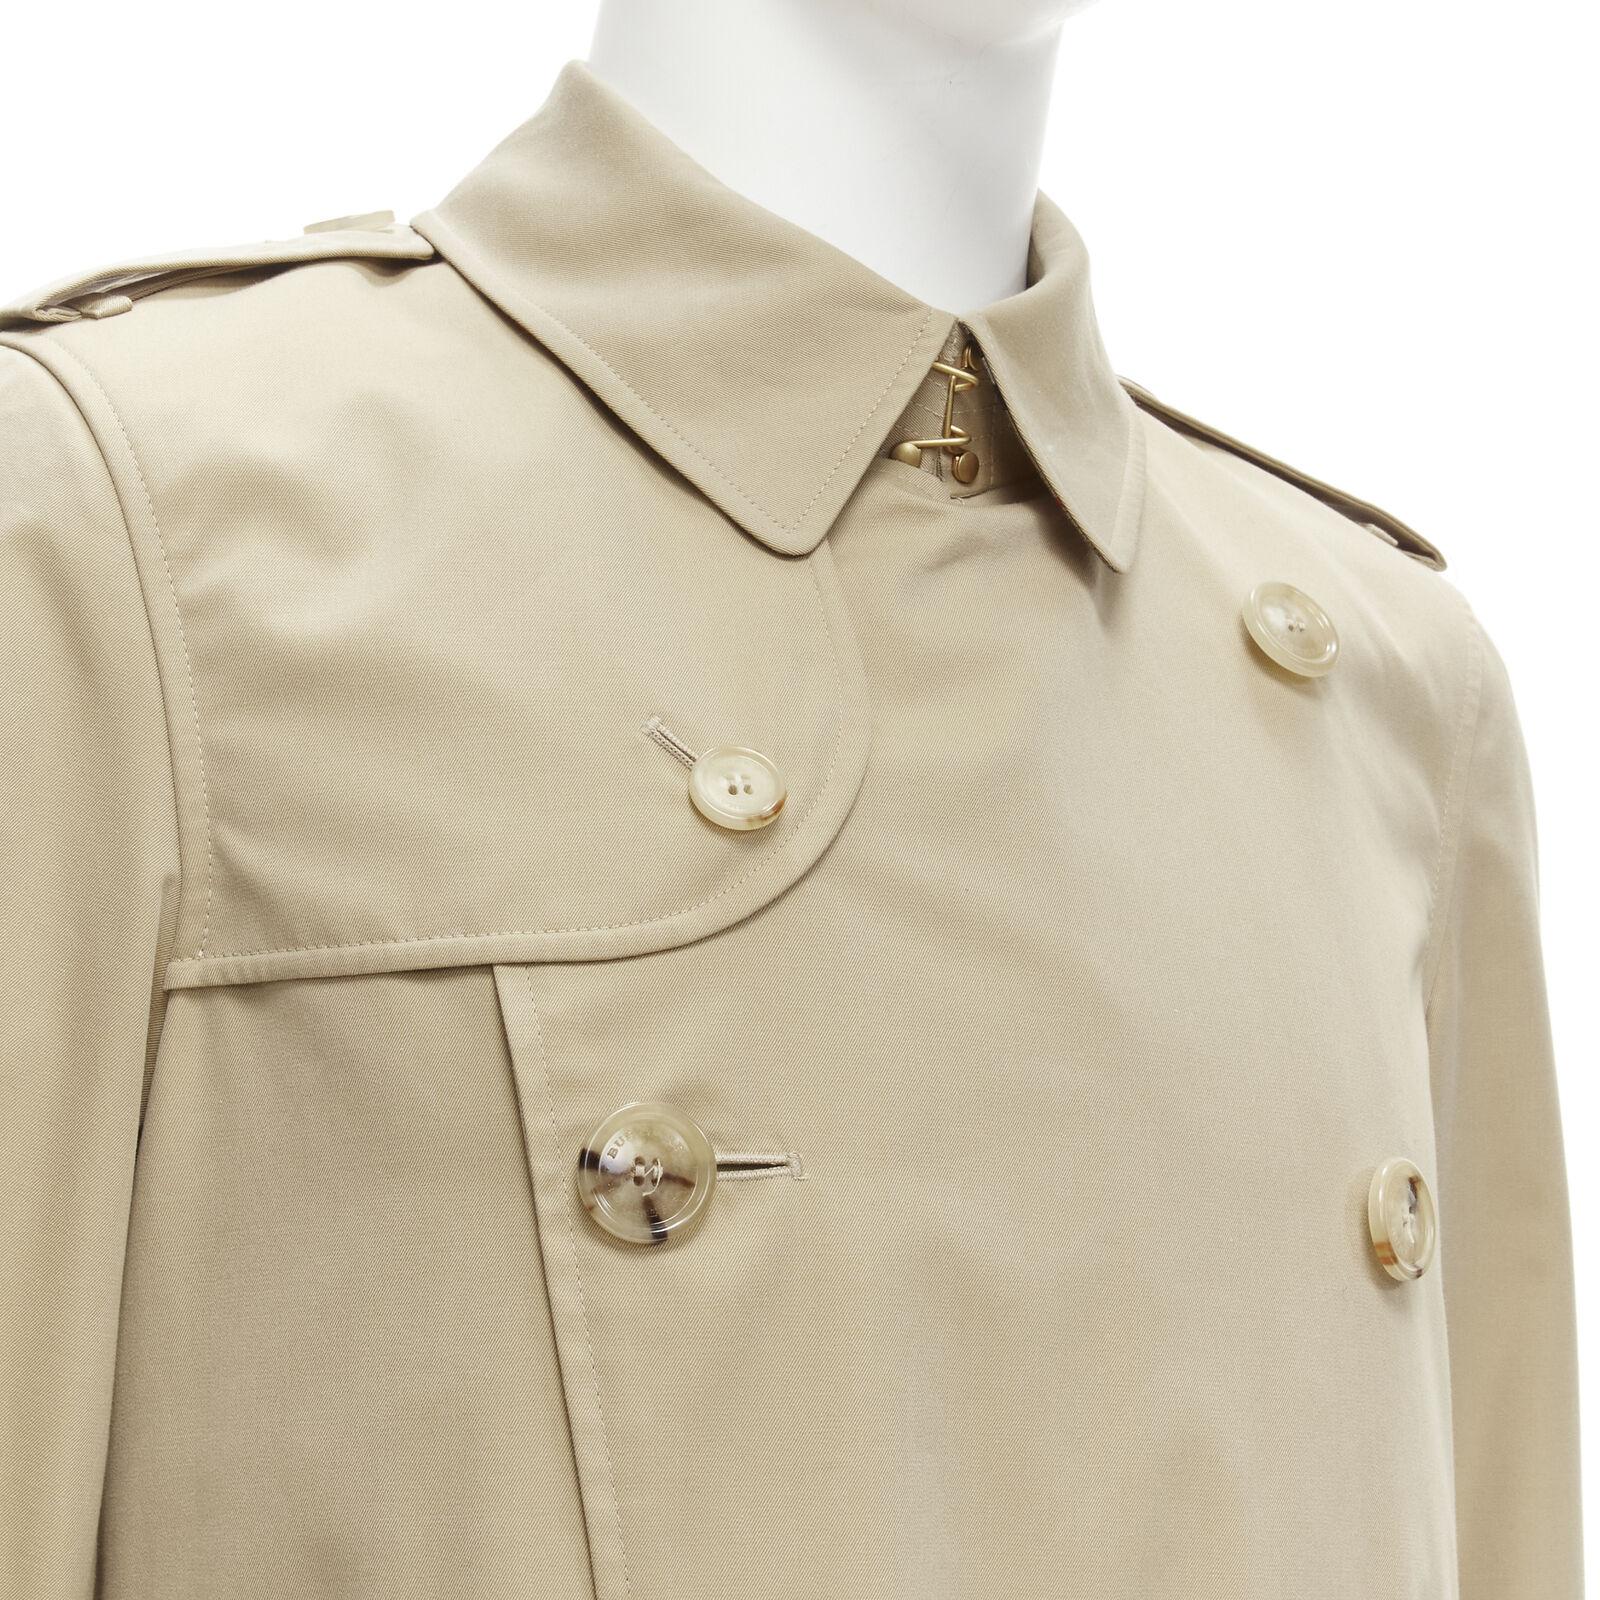 new BURBERRY RICCARDO TISCI Long Chelsea Heritage honey gabardine trench EU46 S
Reference: TGAS/C01549
Brand: Burberry
Designer: Riccardo Tisci
Model: The Long Chelsea Heritage
Material: Cotton
Color: Beige
Pattern: Solid
Closure: Button
Lining: